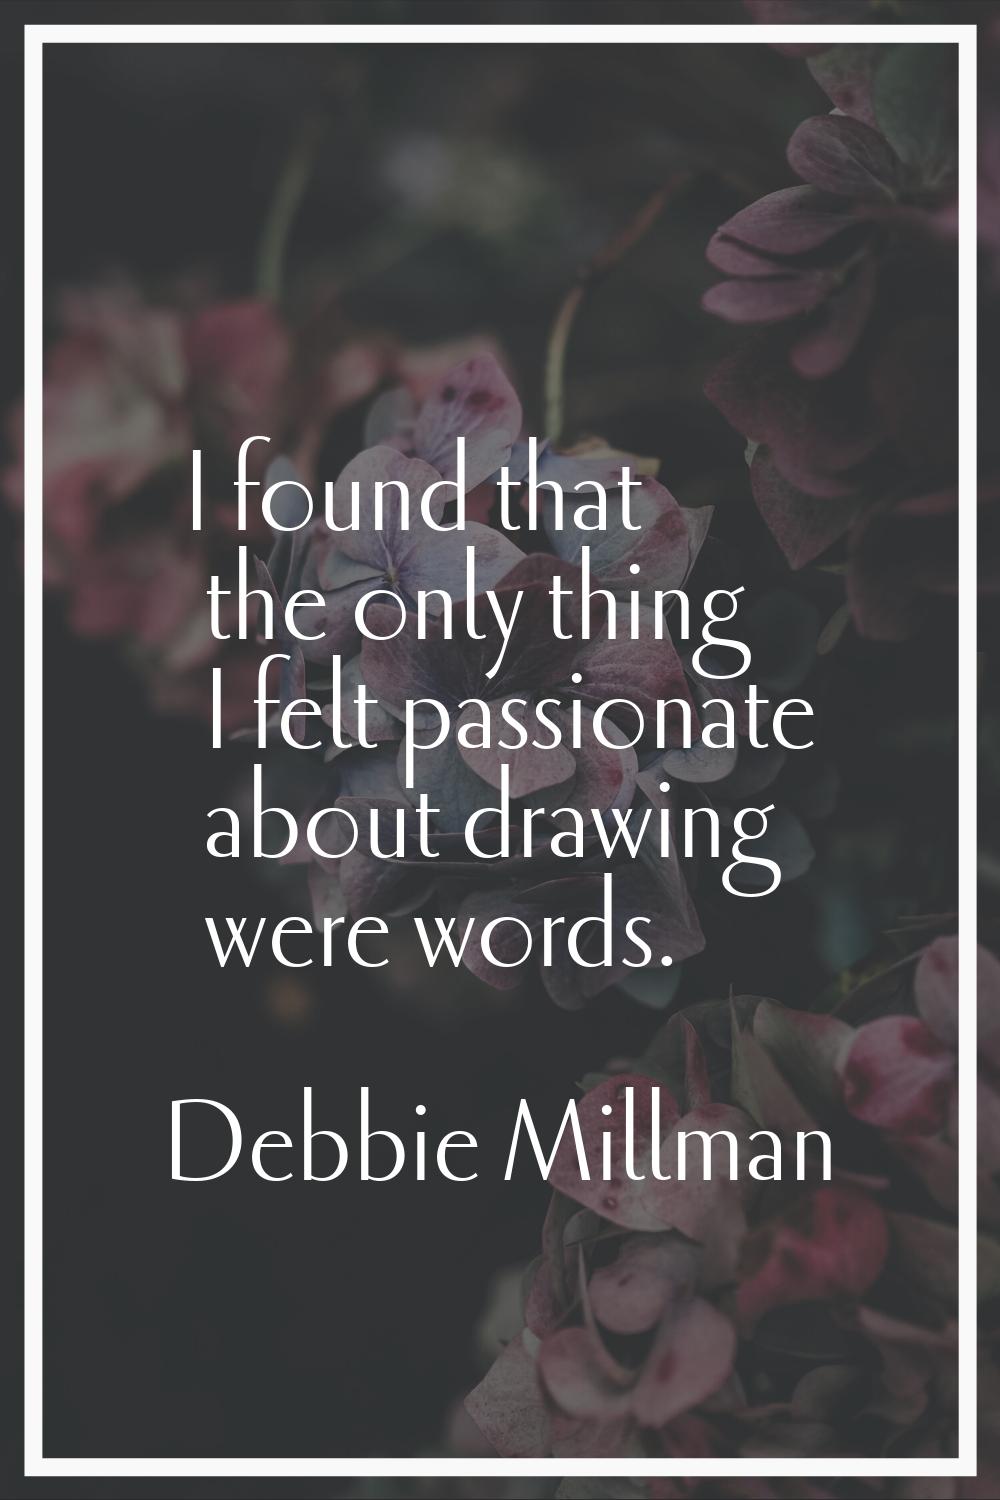 I found that the only thing I felt passionate about drawing were words.